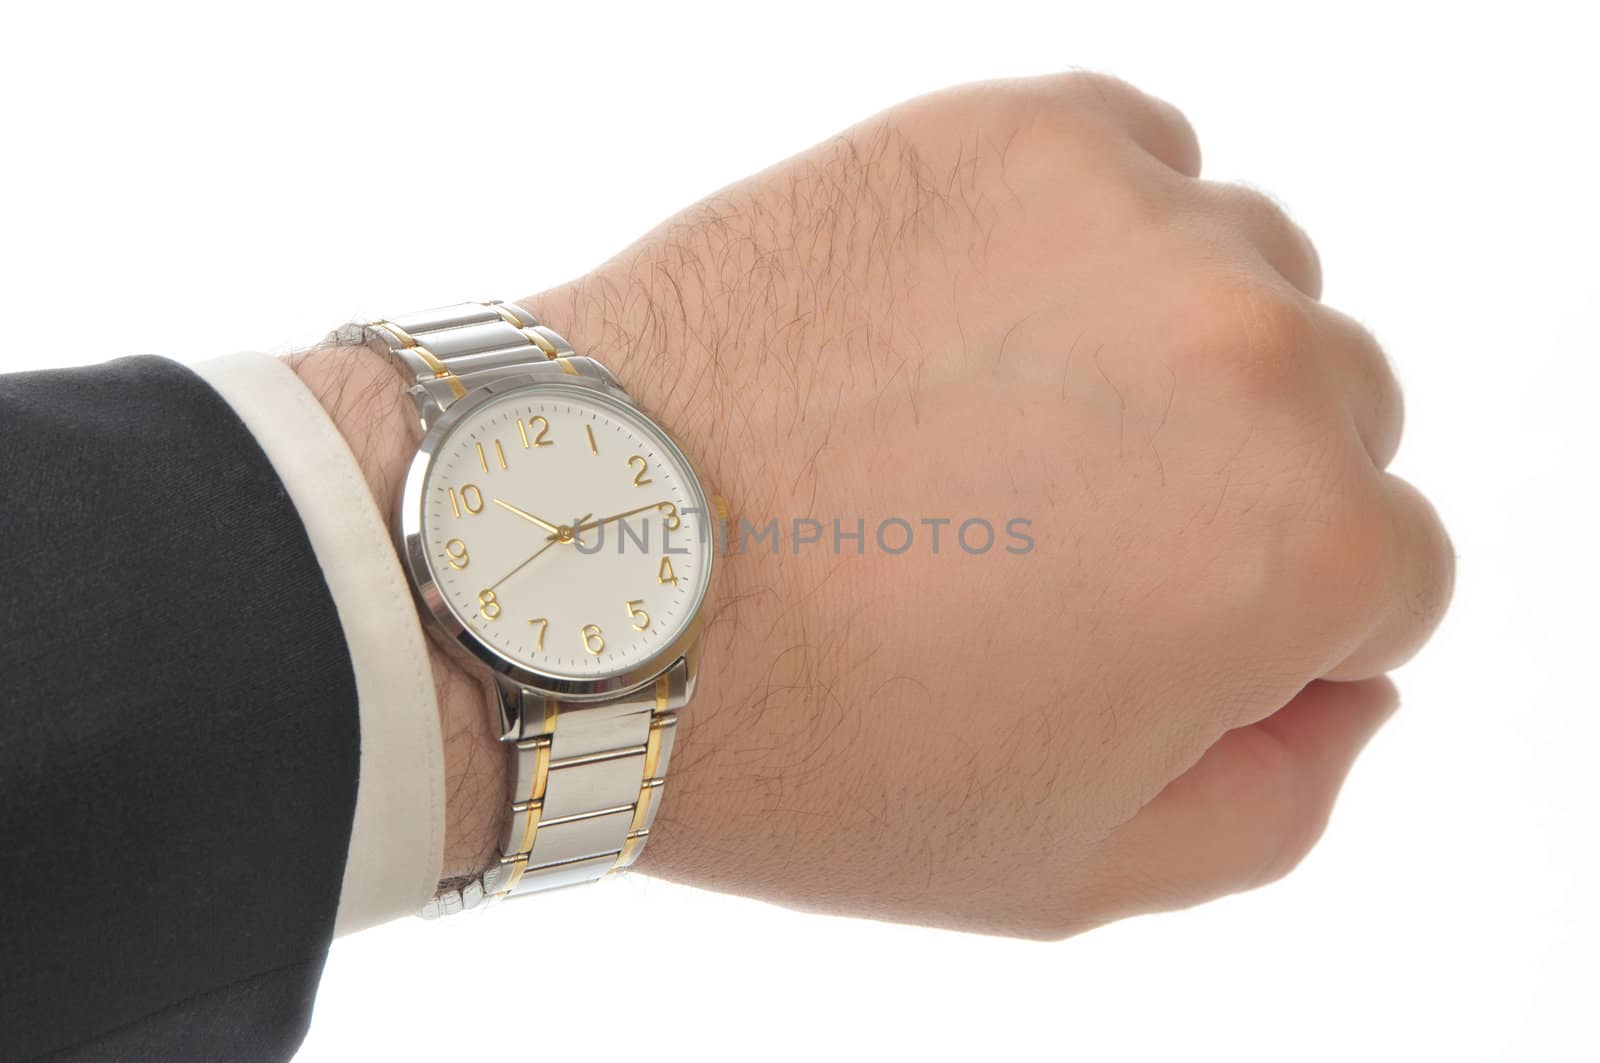 Wristwatch on hand  by dyoma